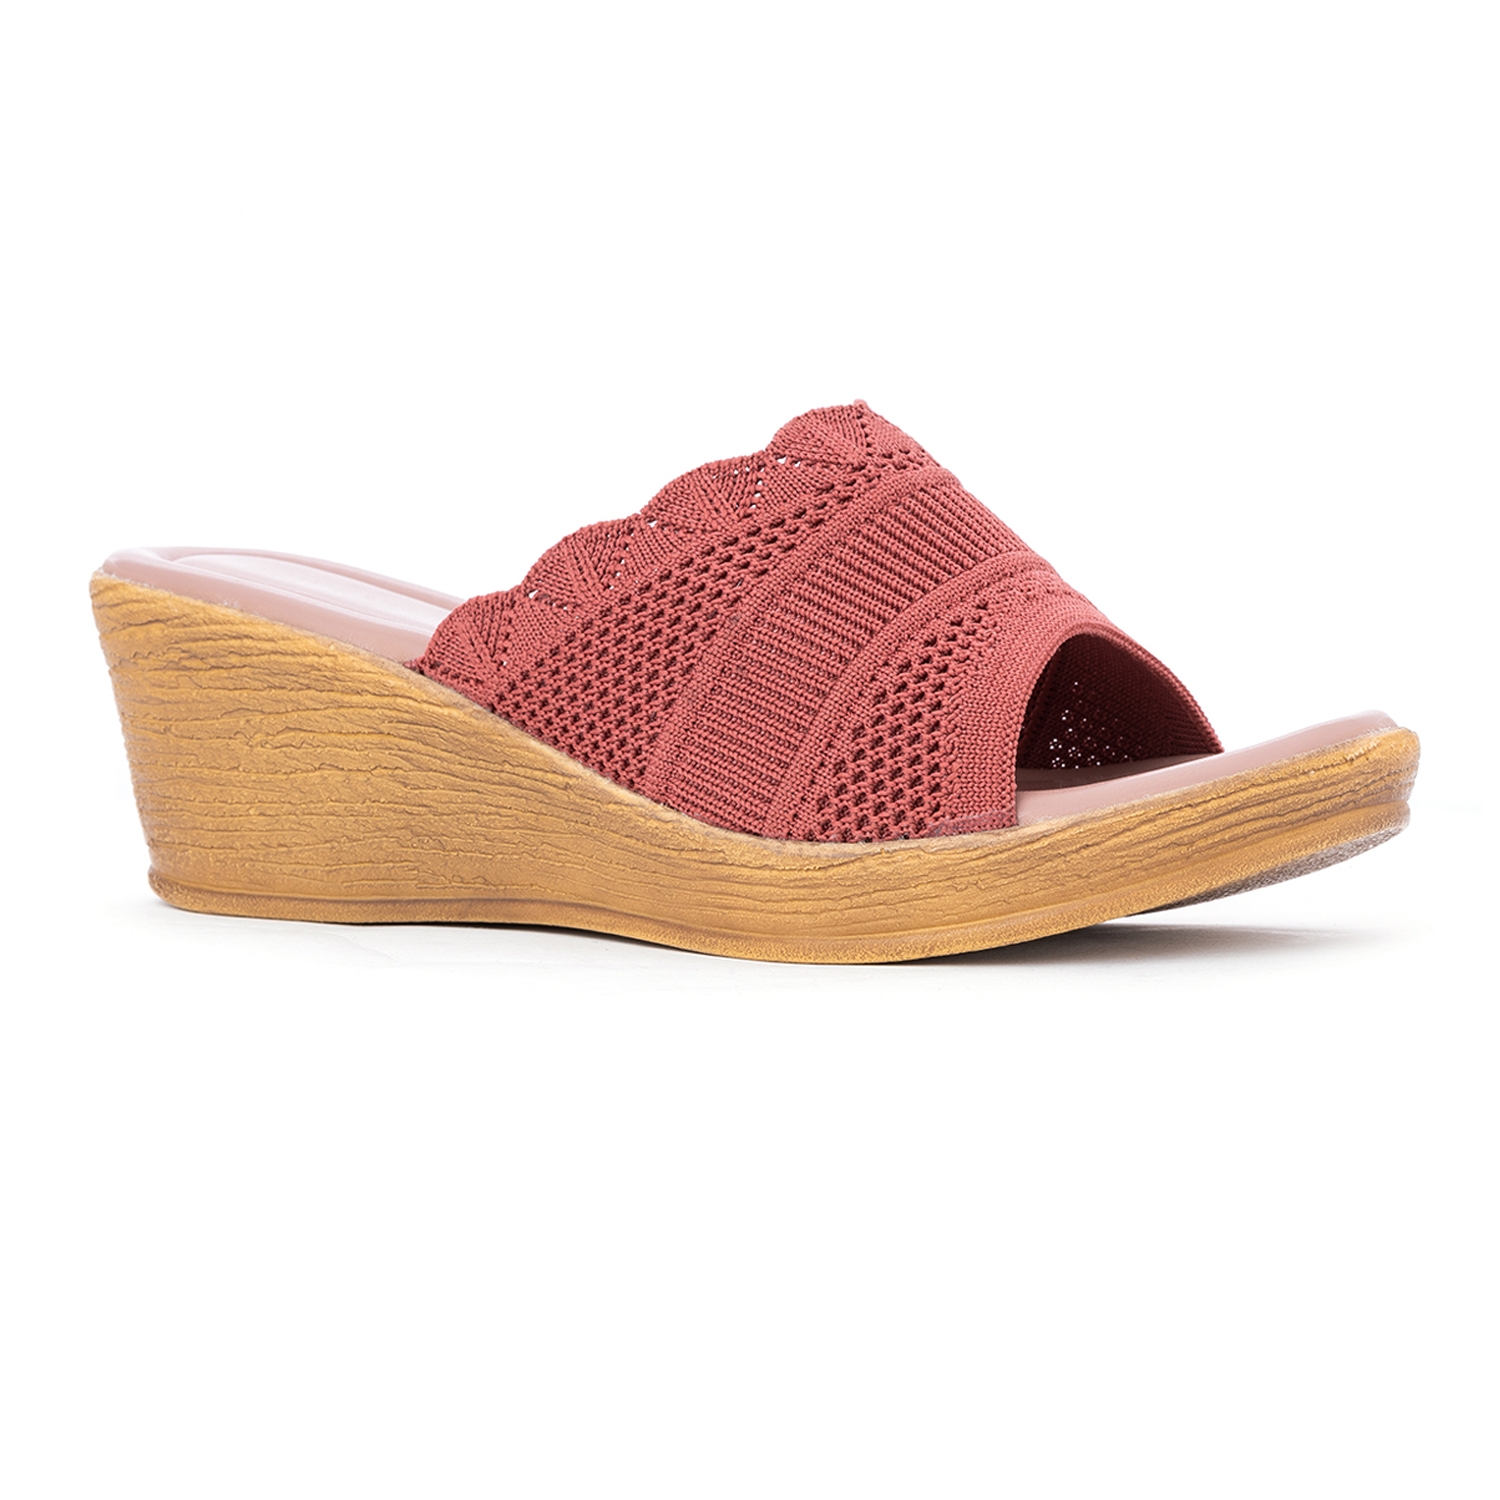 Khadim's Pink Colour Slip On / Heels having Textile Upper Material - Daily Wear Use for Women ( Size : 3 )